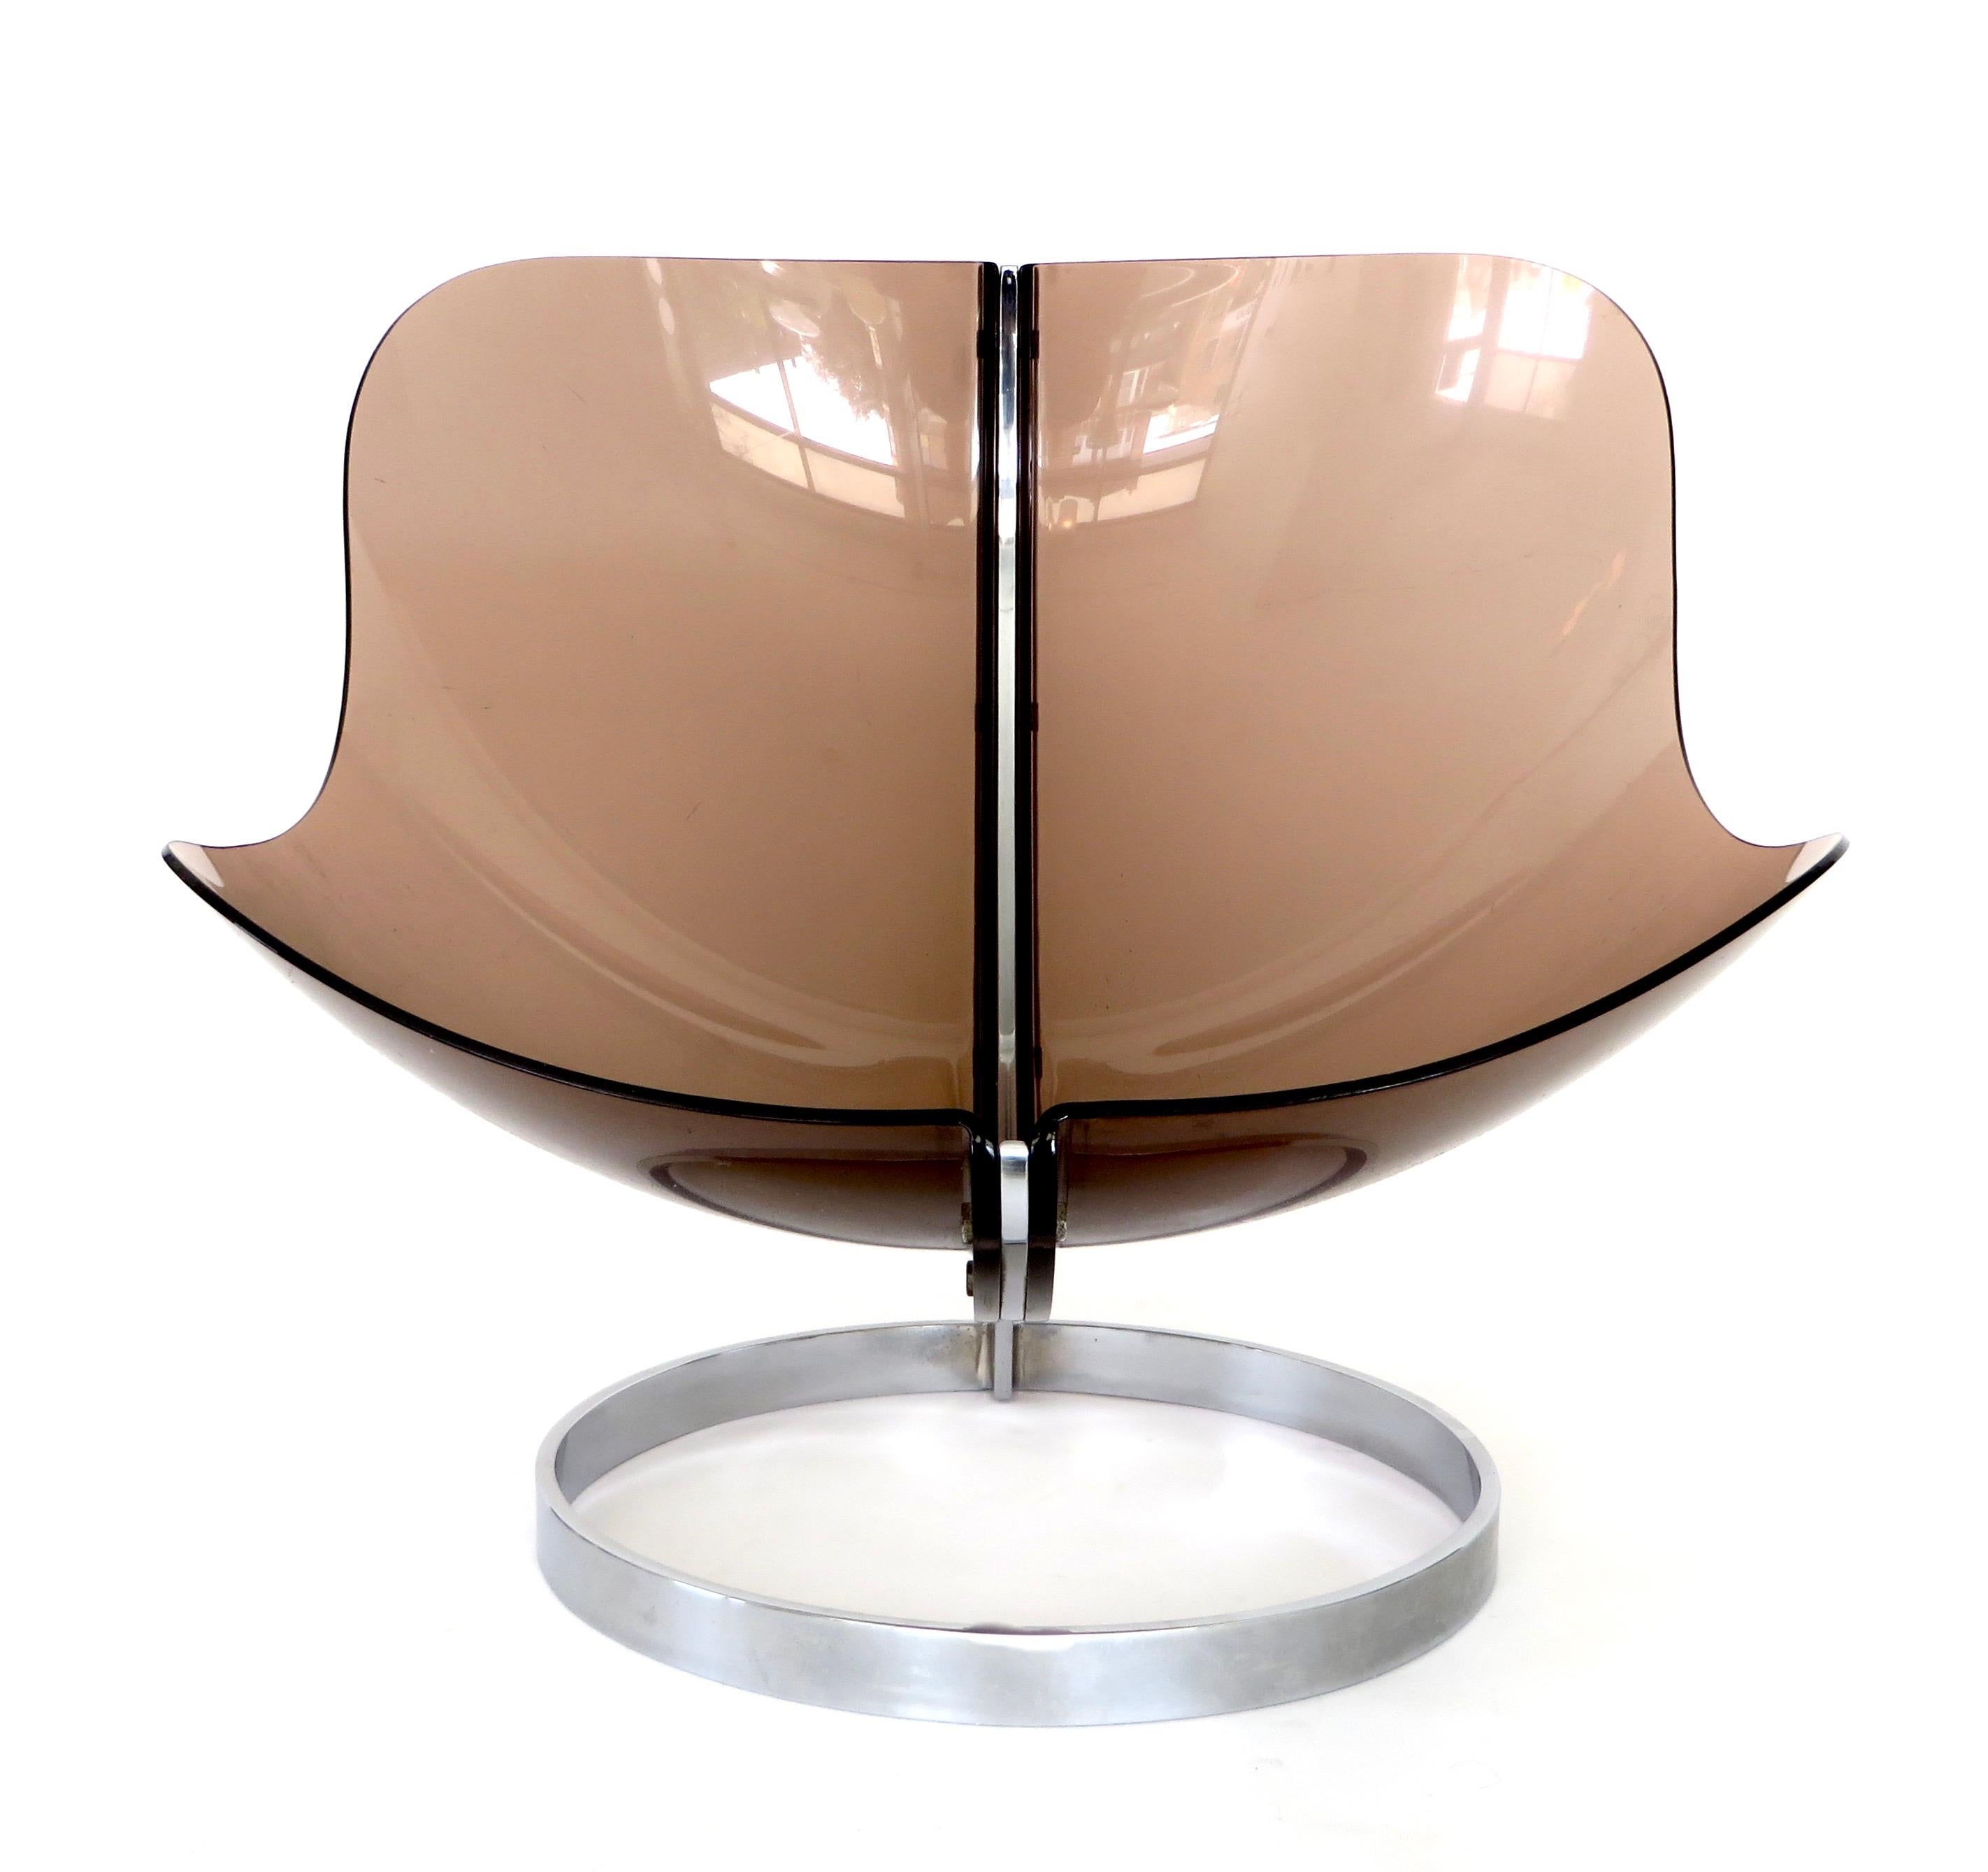 Boris Tabacoff French Sphere Chair Lucite Altuglas and Chrome c1971 8